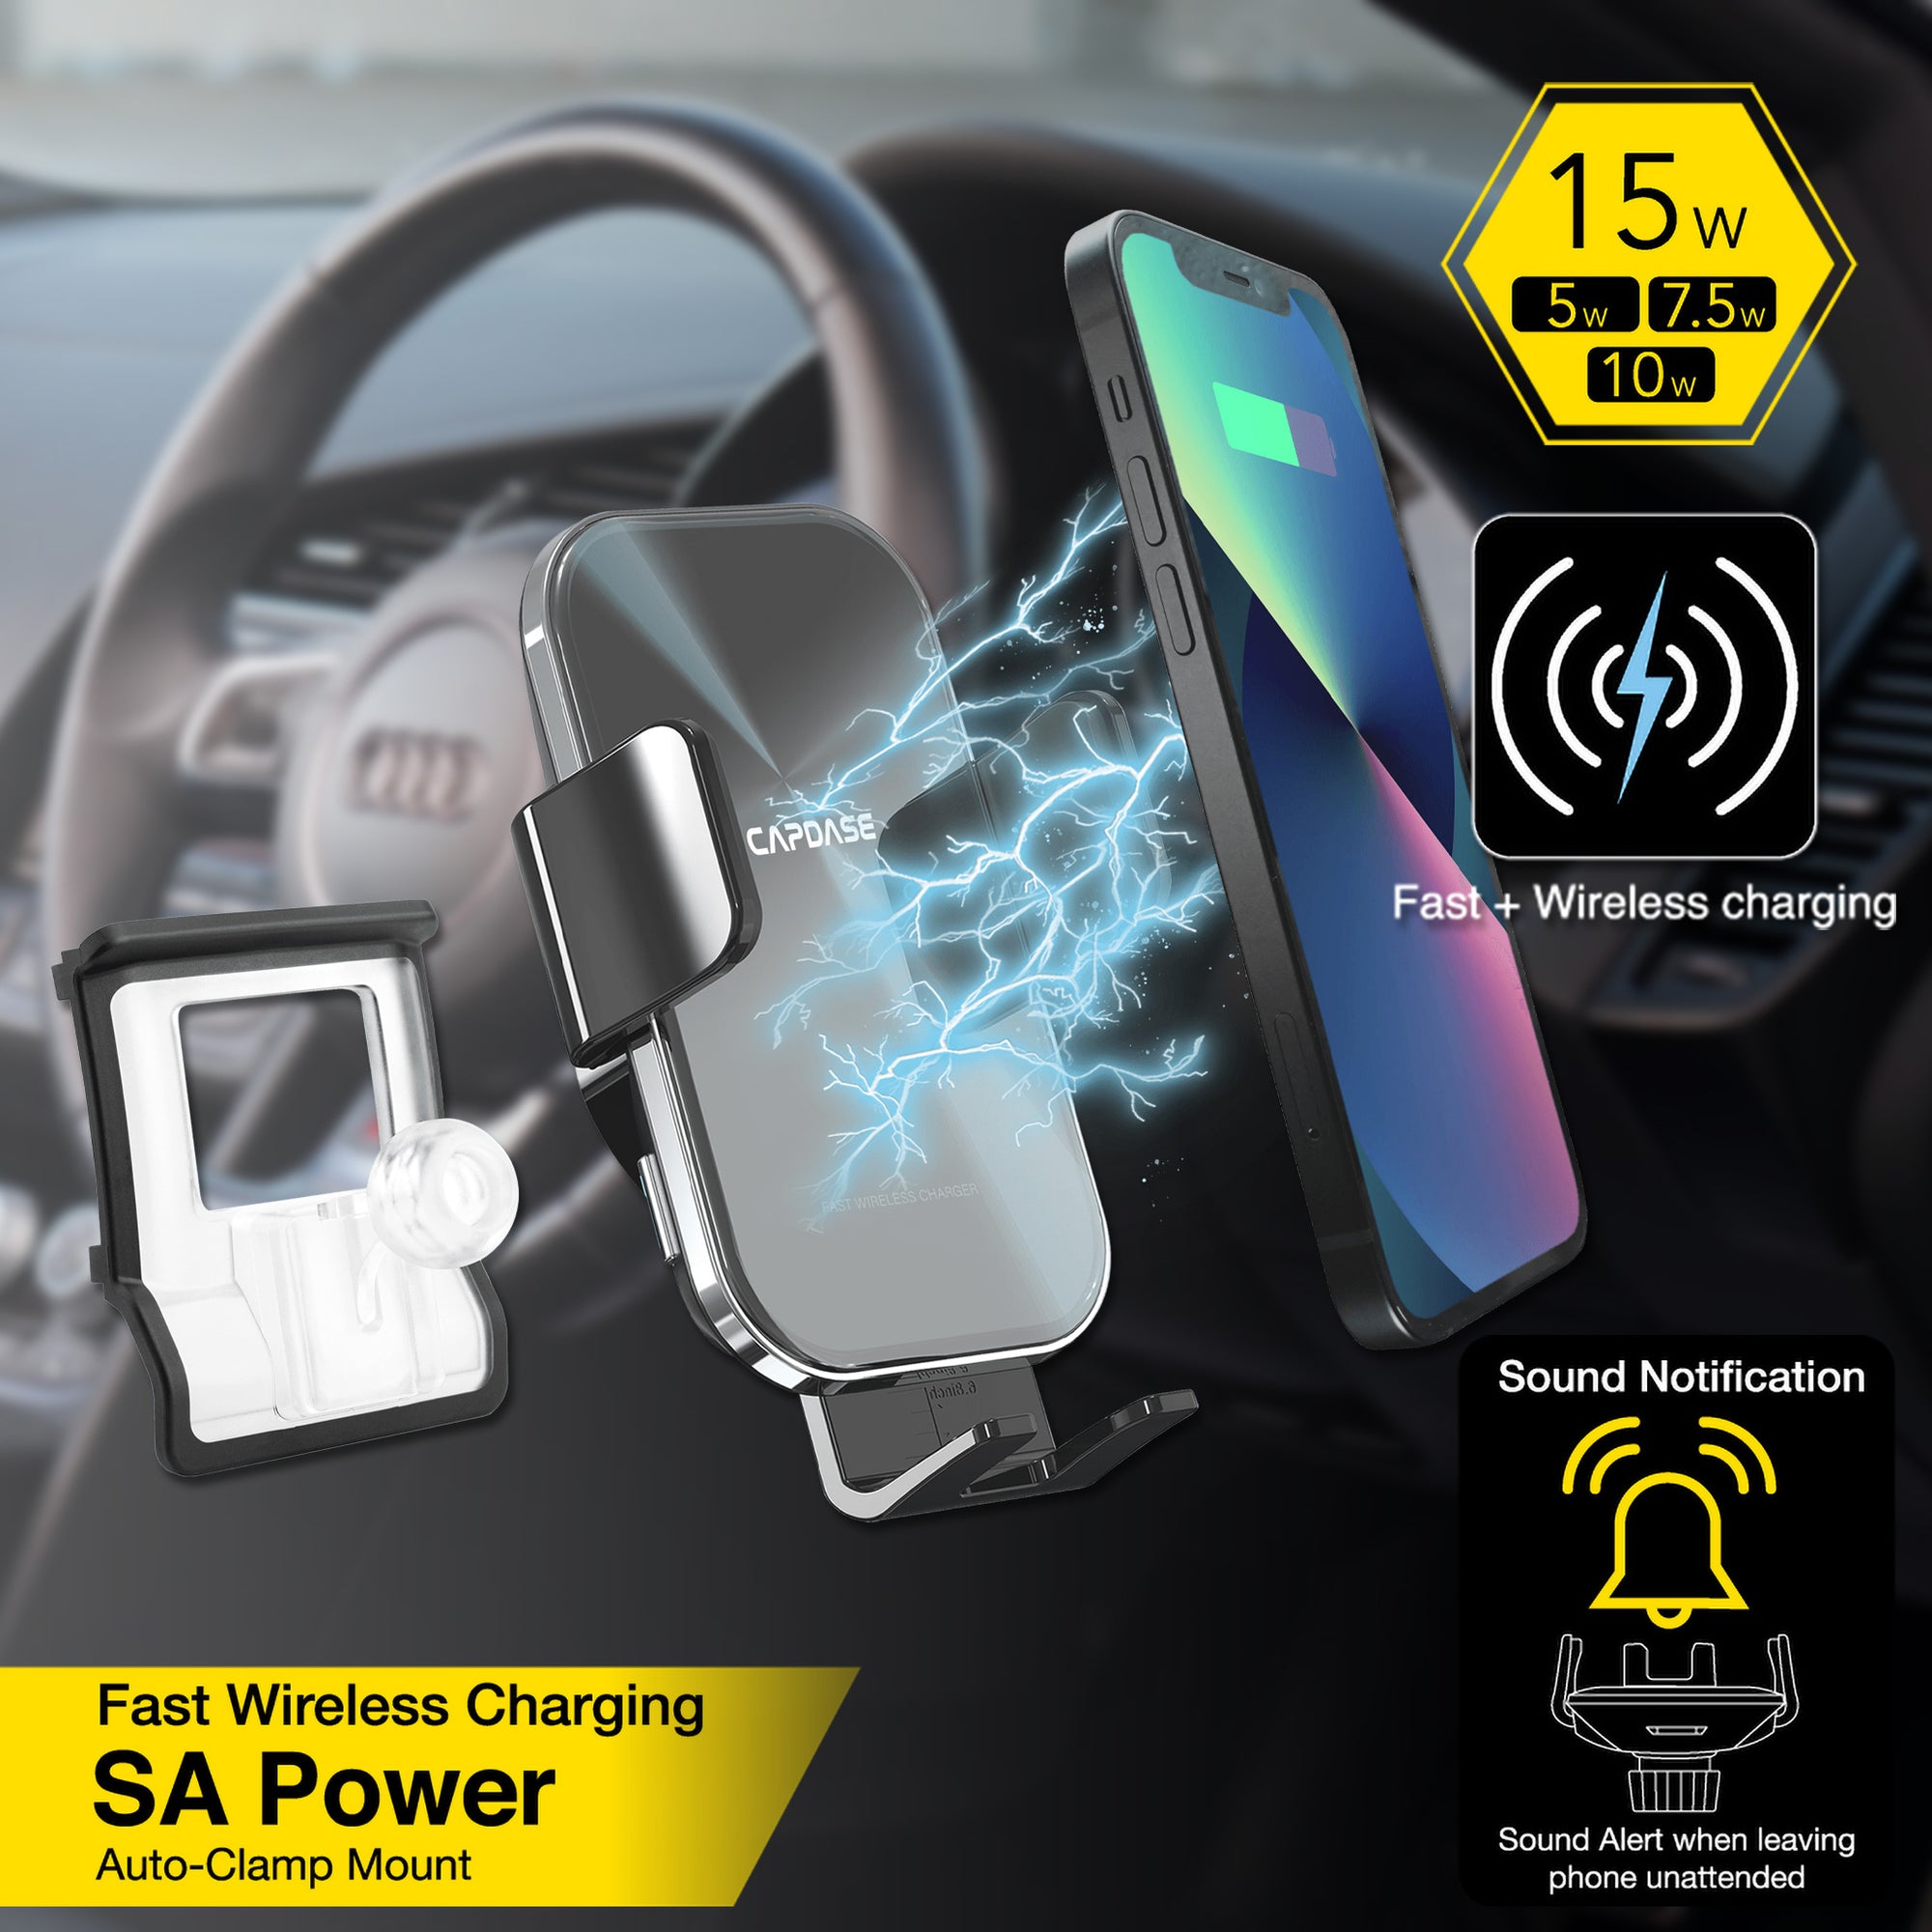 M-CM Power II Ceramic Cooling Fast Wireless Charging Magnetic Car Moun -  Capdase